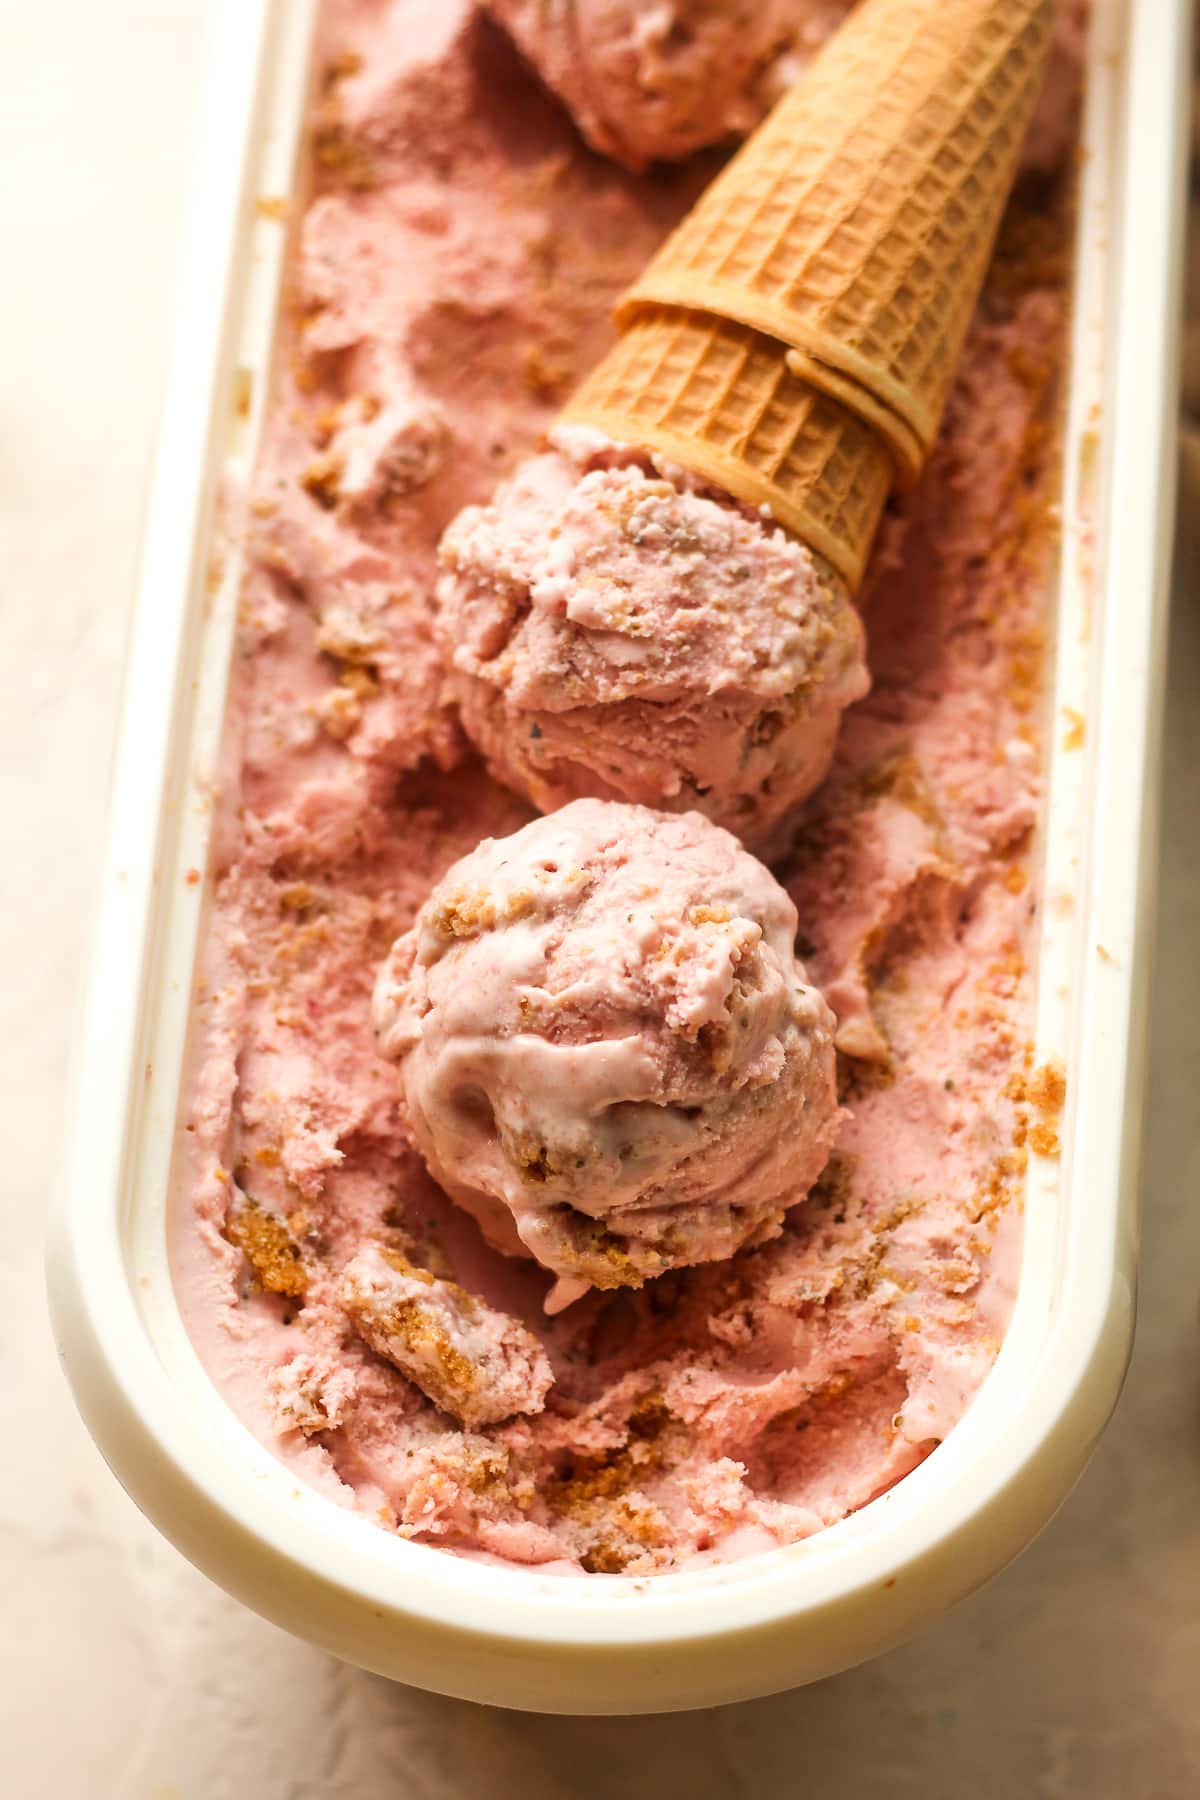 A container of scoops of ice cream and two sugar cones.